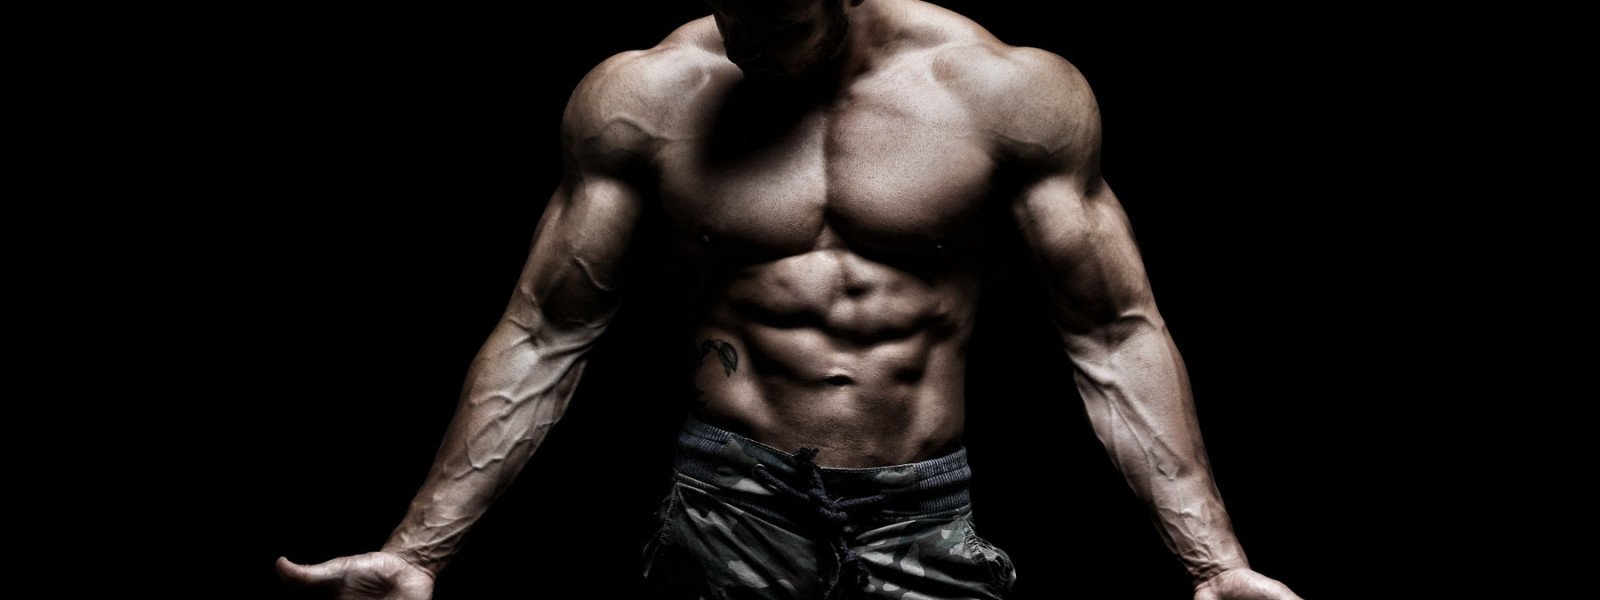 Anavar or Trenbolone: Choosing the Right Steroid